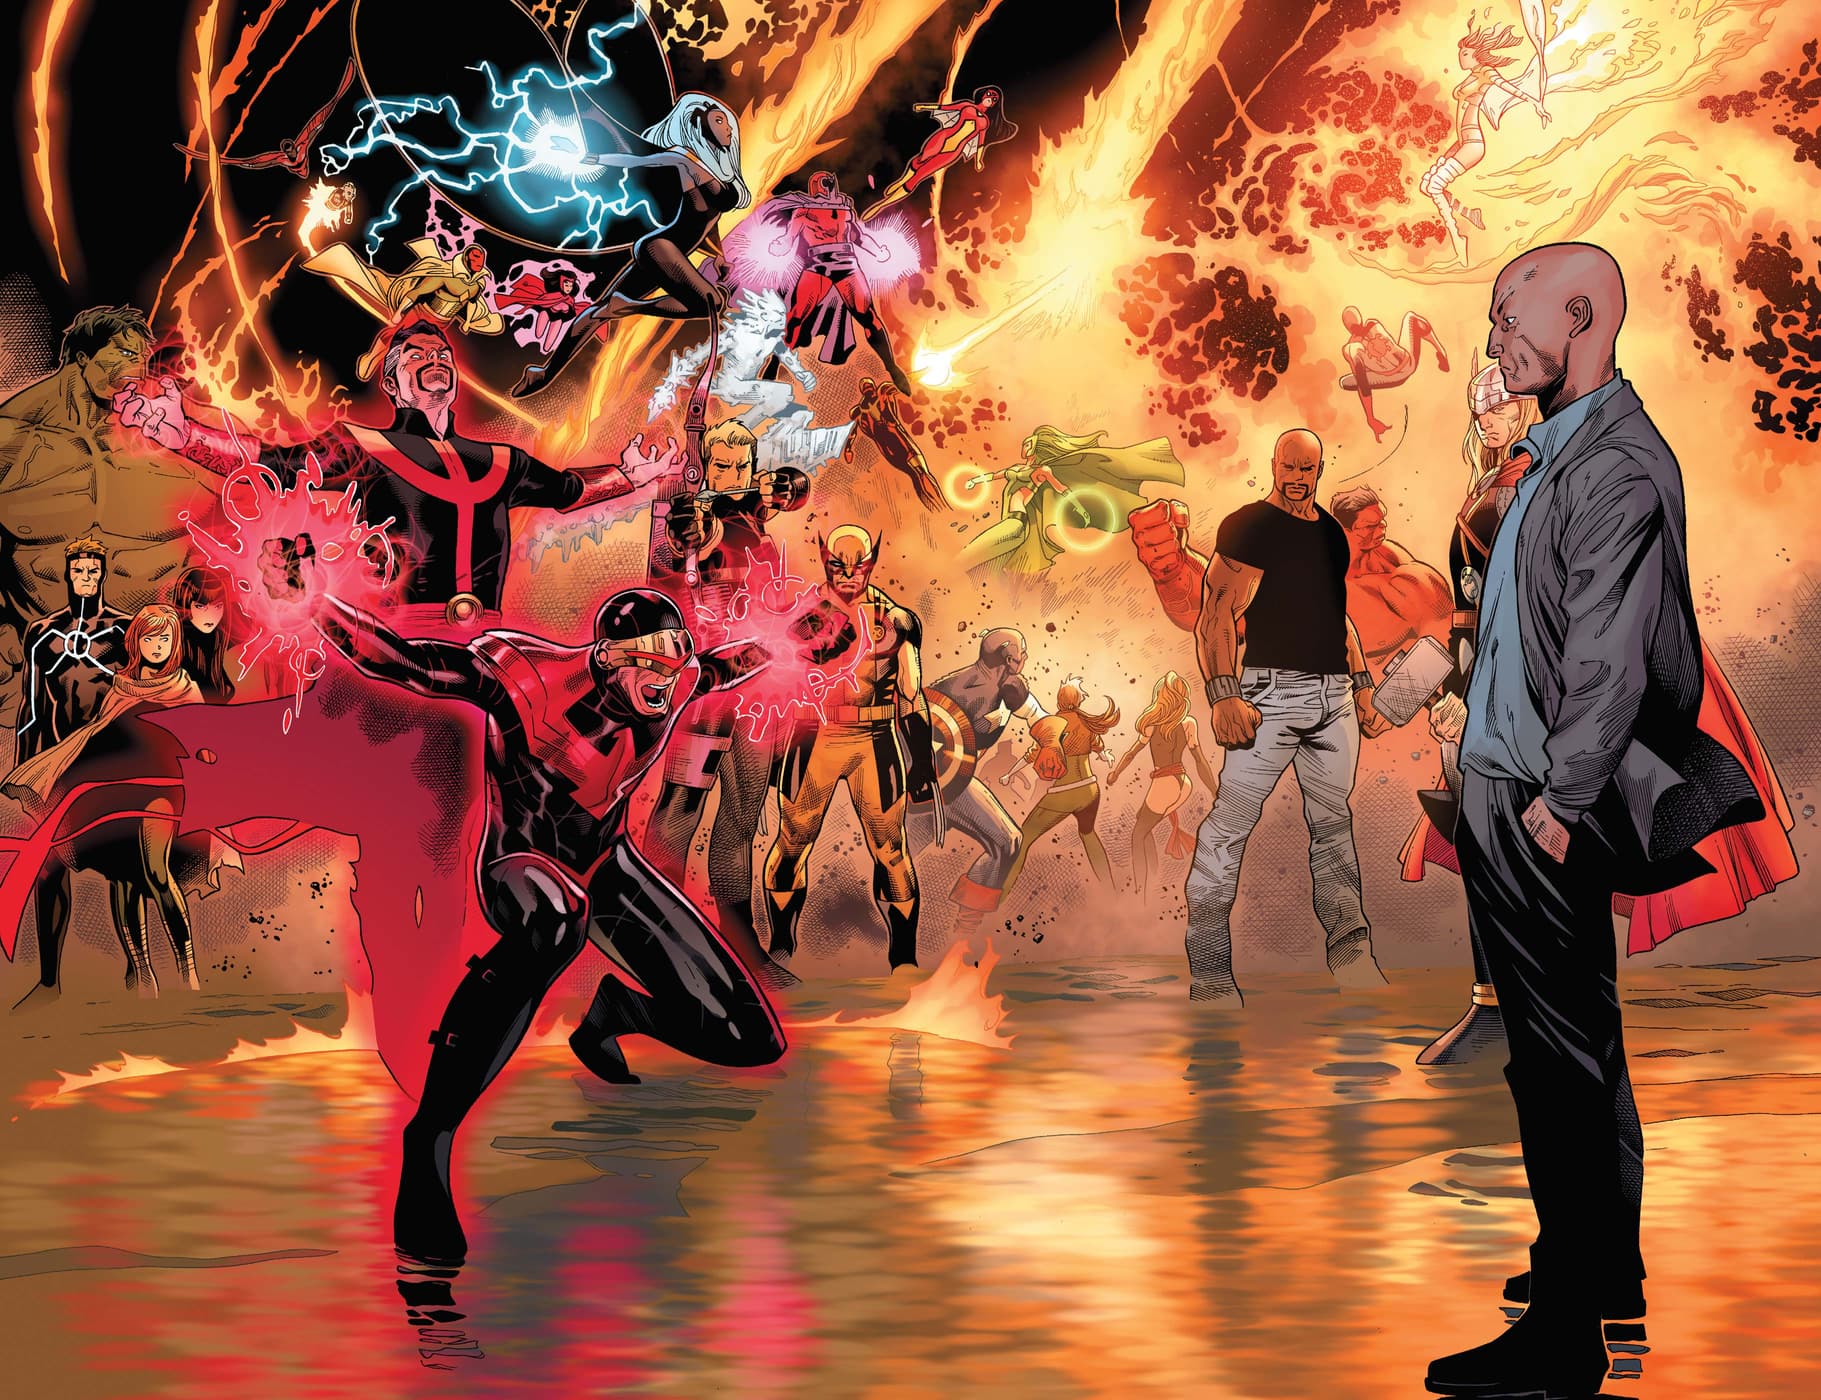 AVENGERS VS. X-MEN (2012) #11 page by Brian Michael Bendis, Olivier Coipel, Mark Morales, Laura Martin, and Chris Eliopoulos